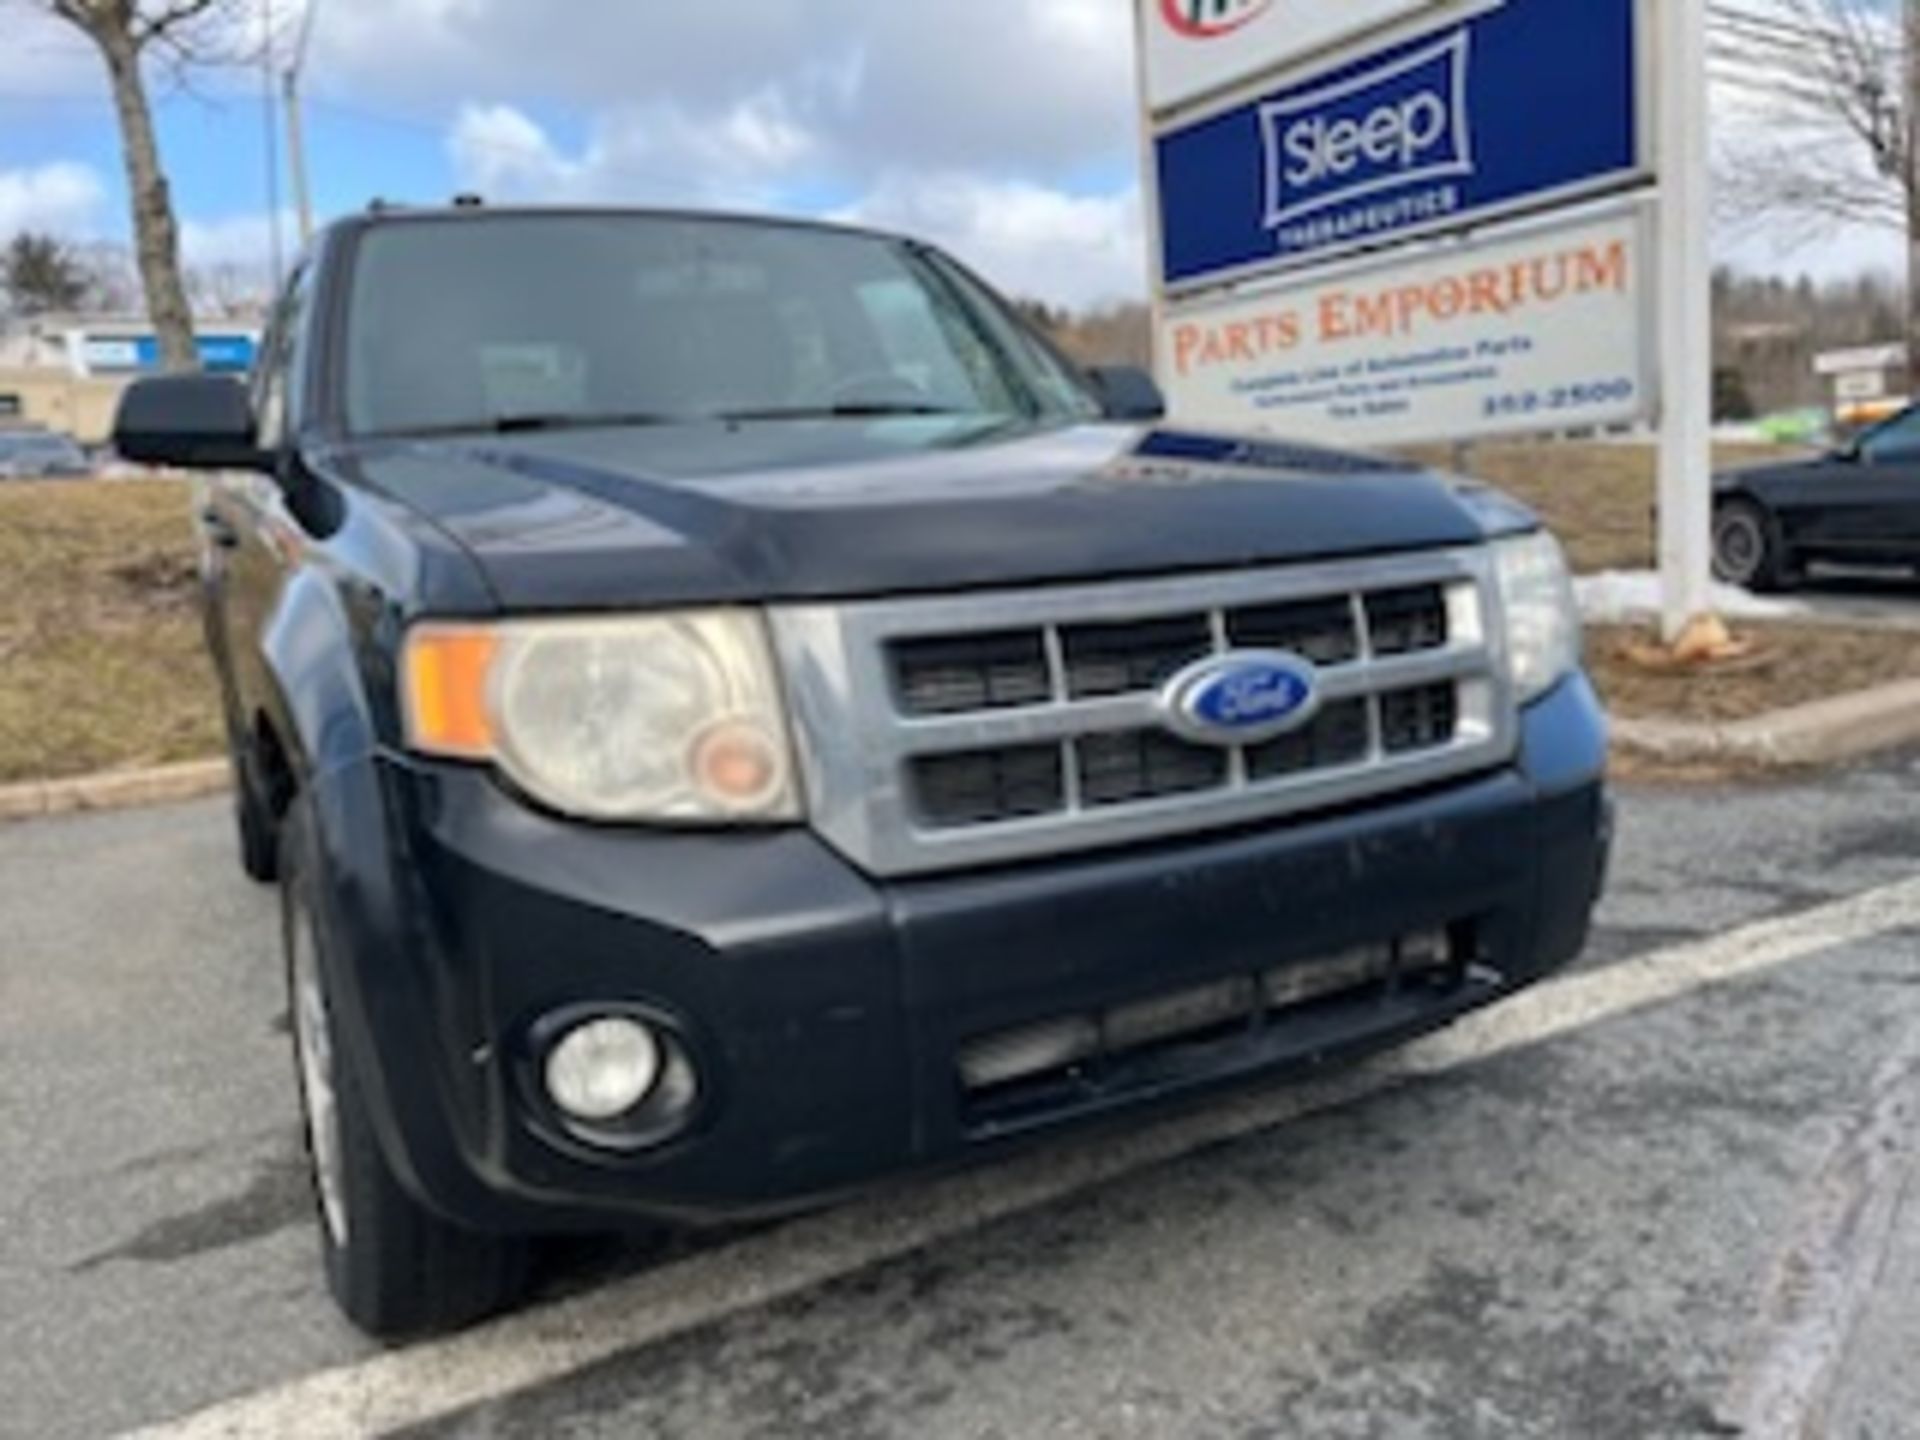 2011 FORD ESCAPE XLT